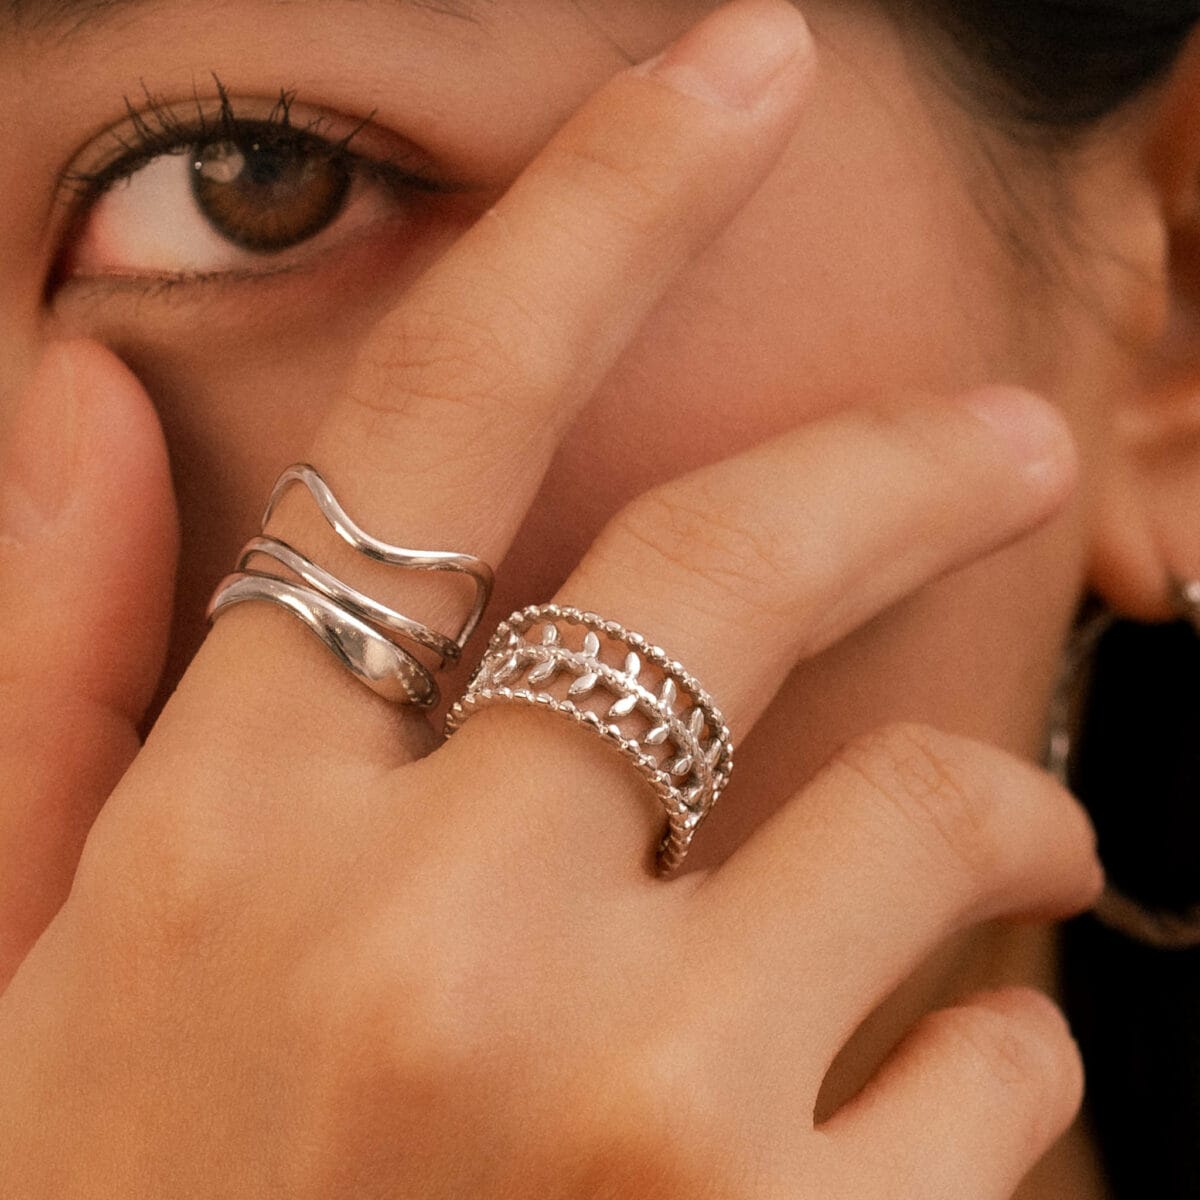 https://m.clubbella.co/product/aura-spiral-ring/ Aura Spiral and Eternal Foliage Silver RIng (2)